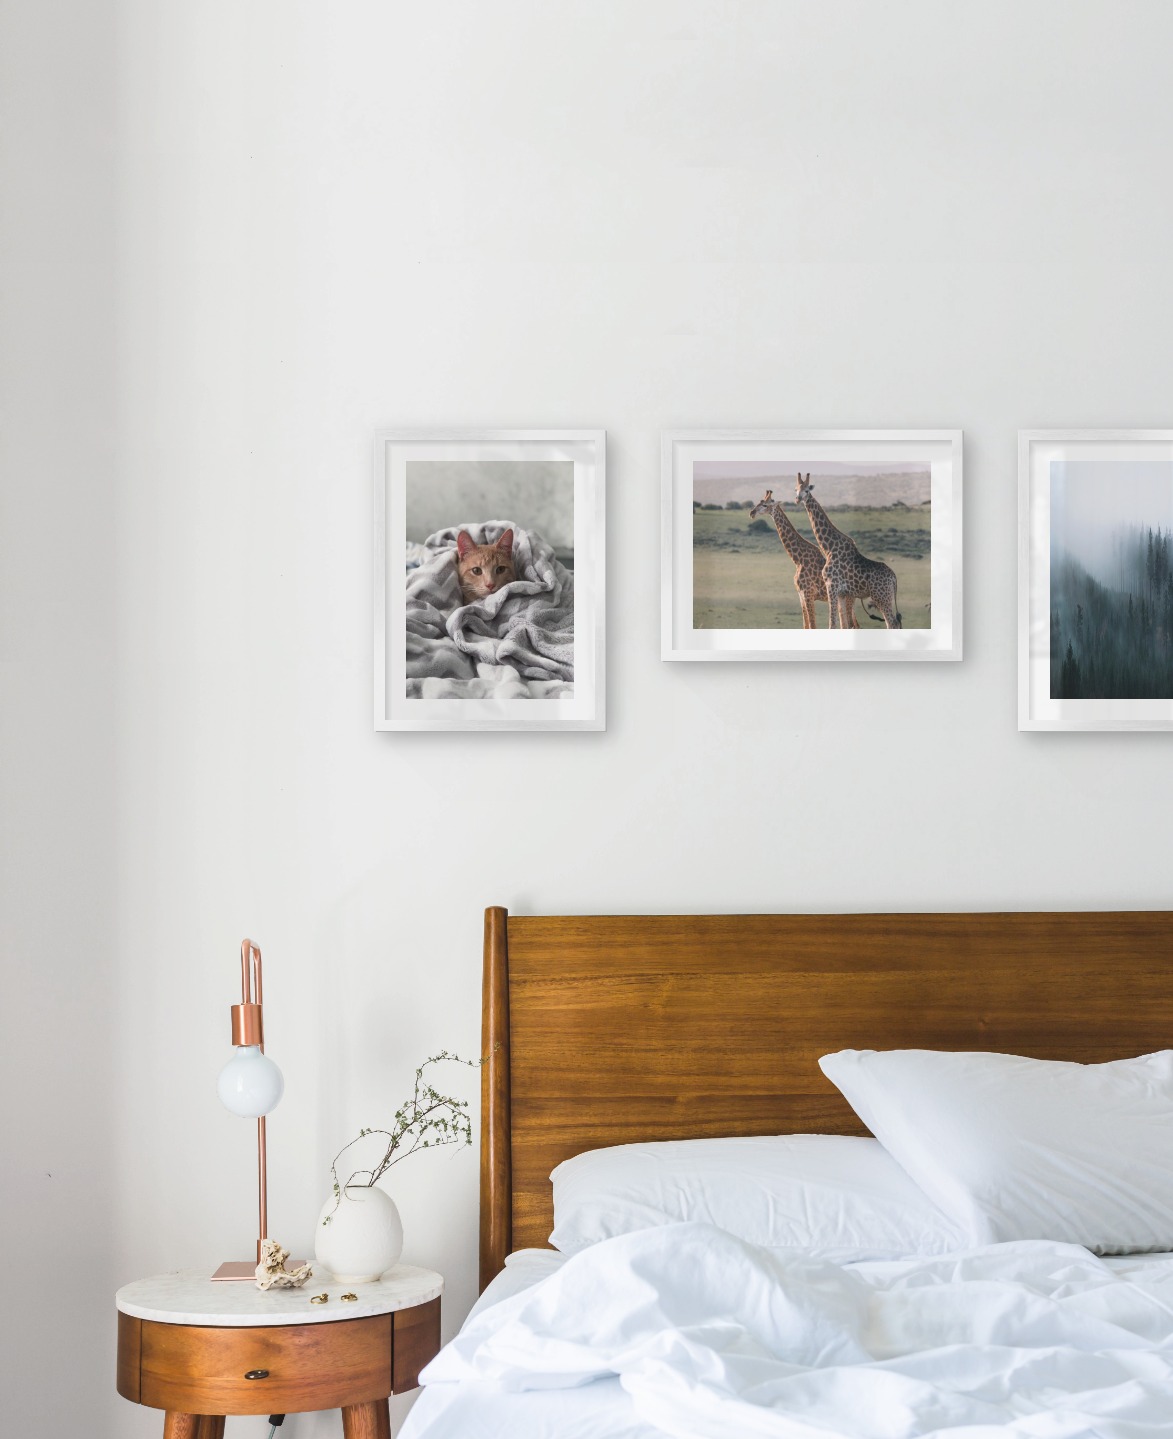 Gallery wall with picture frames in silver in sizes 30x40 with prints "Cat in felt", "Two giraffes" and "Foggy forest"